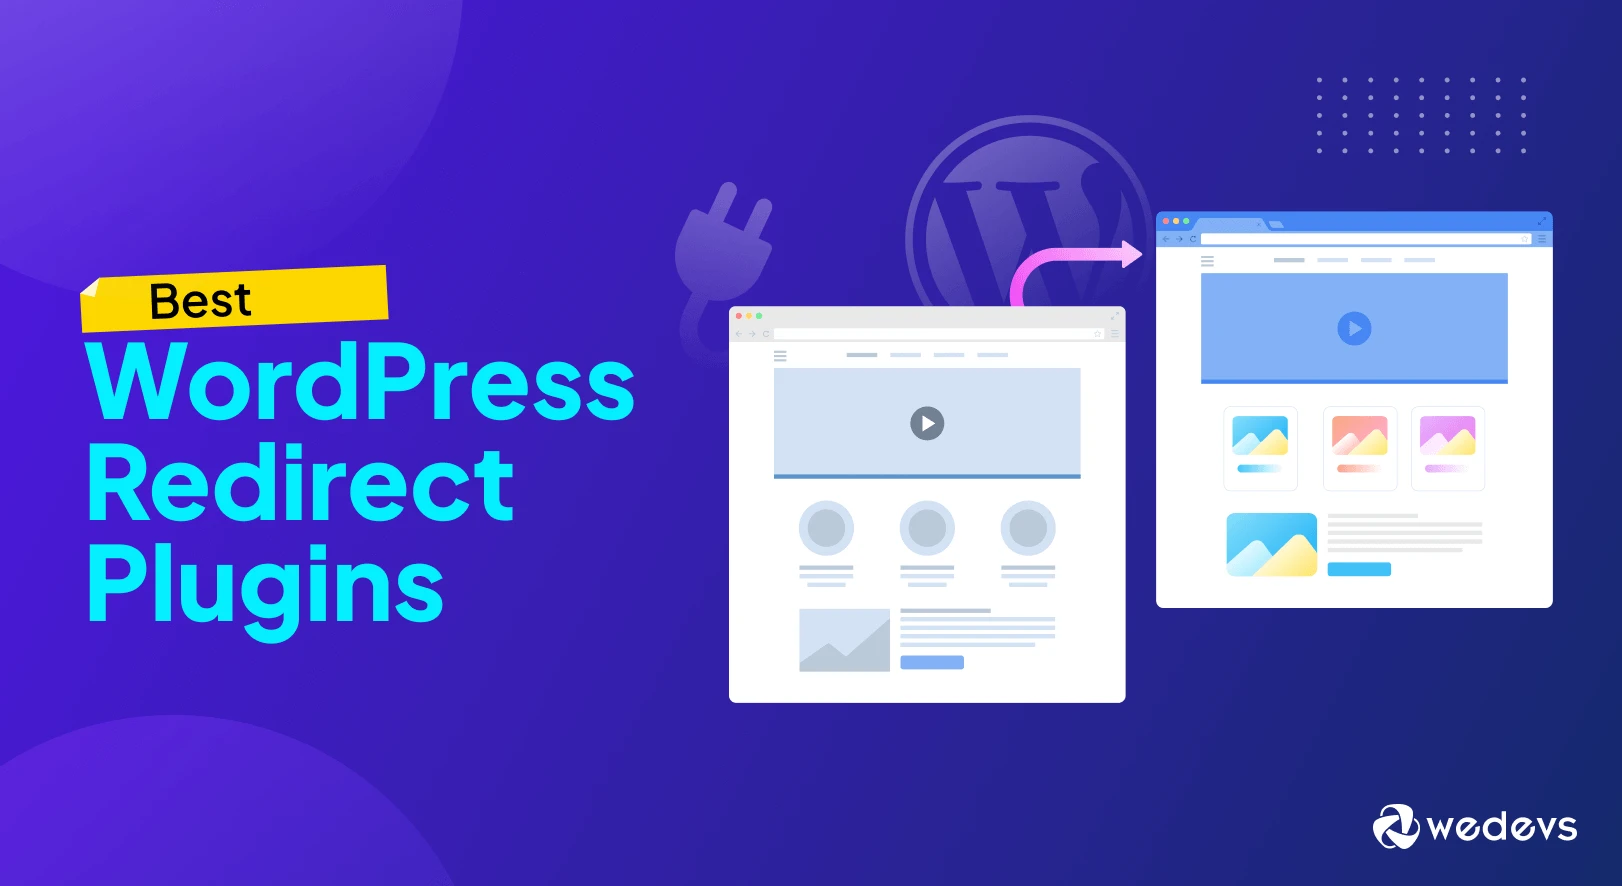 9 Best WordPress Redirect Plugins: A List from Experts